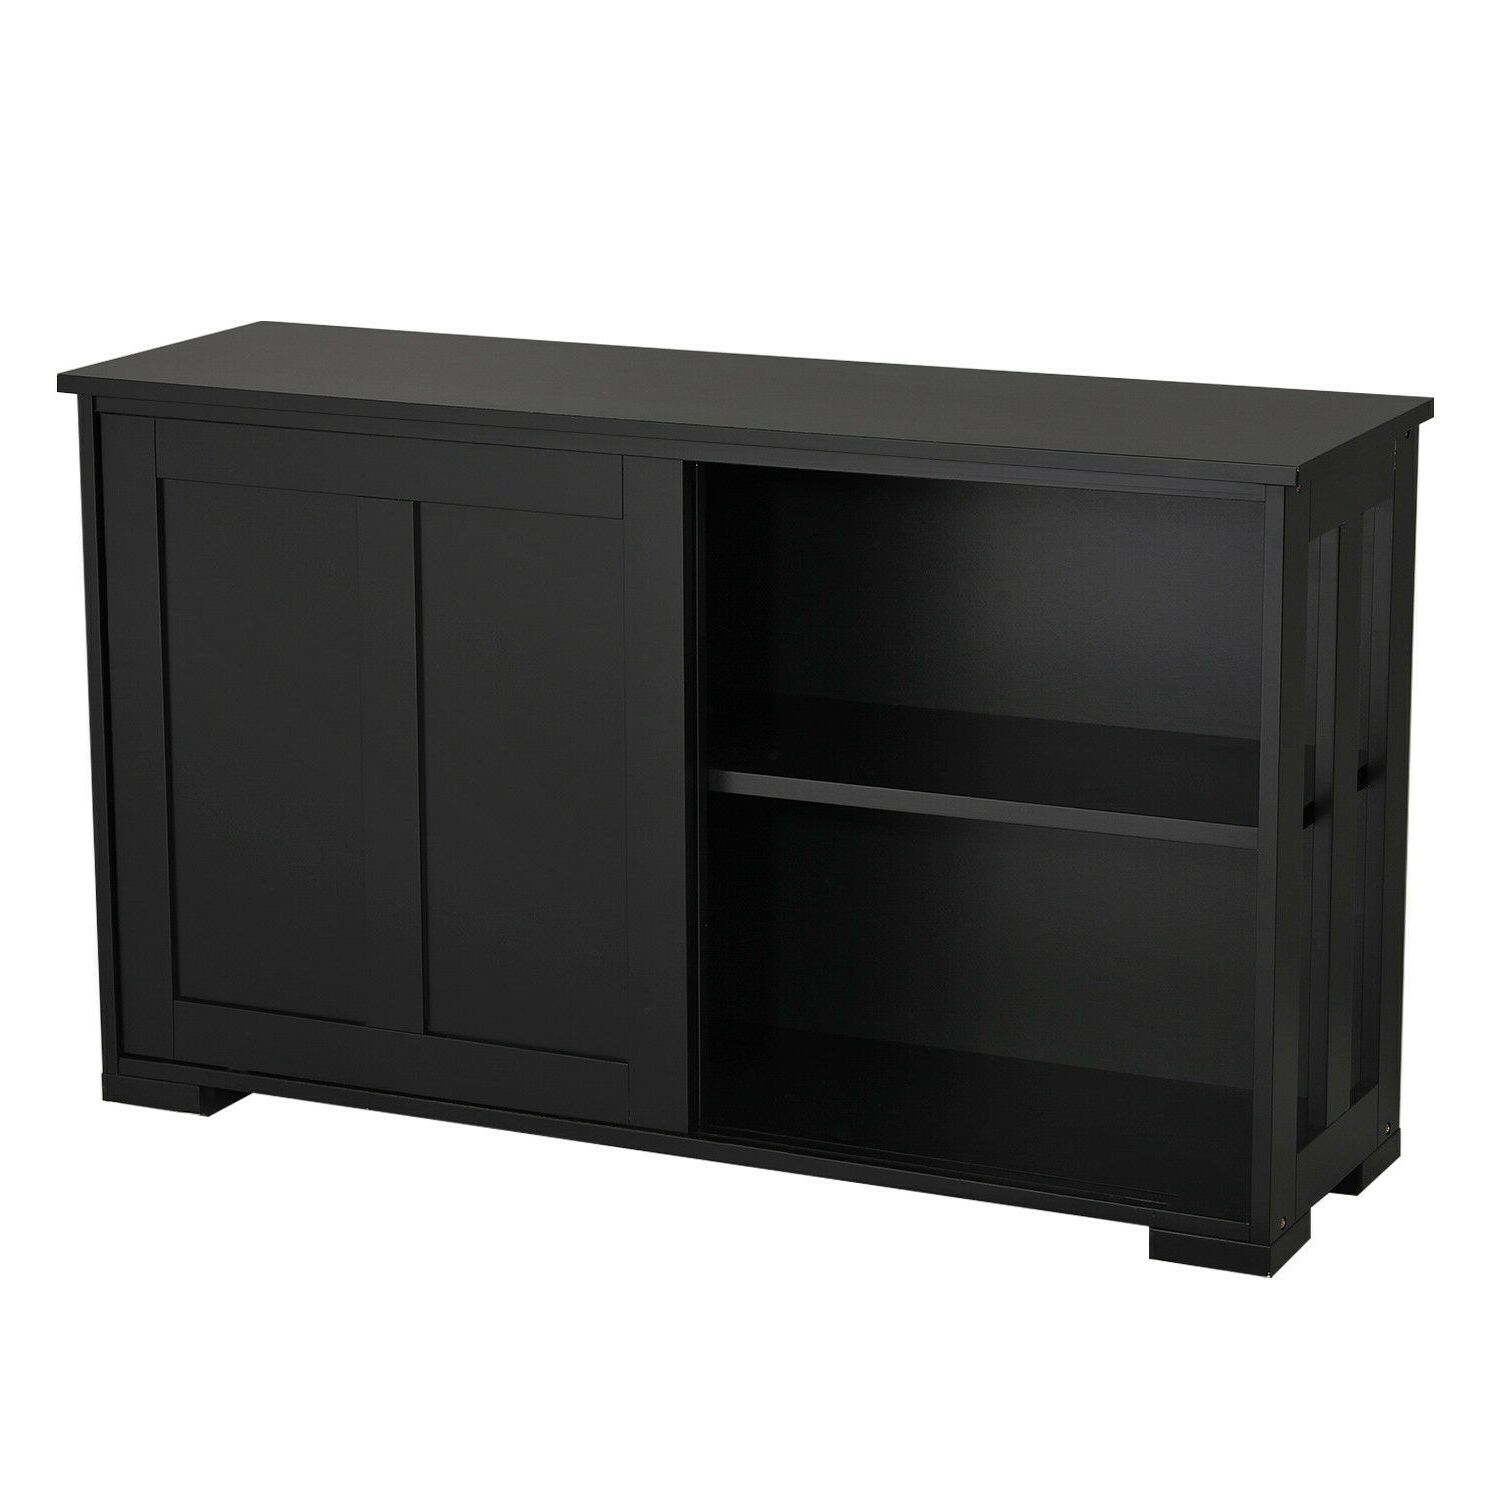 Kitchen Storage Cabinet Buffet Server Table Sideboard Dining Room Wood Black Throughout Black Hutch Buffets With Stainless Top (Gallery 10 of 20)